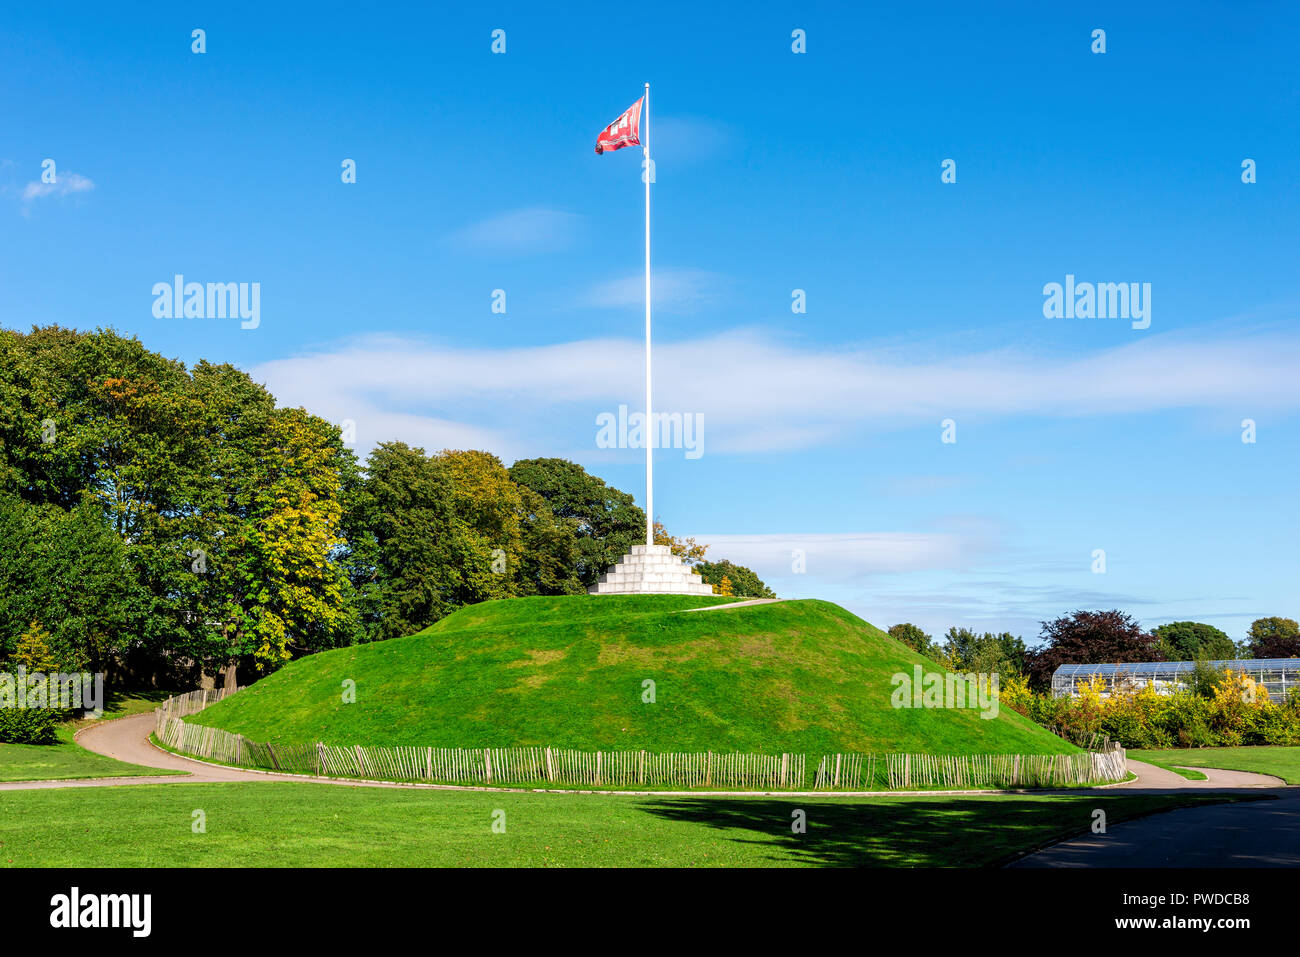 The Mound (artificial hill) wiith a tall flagpole in Duthie Park, Aberdeen, Scotland Stock Photo